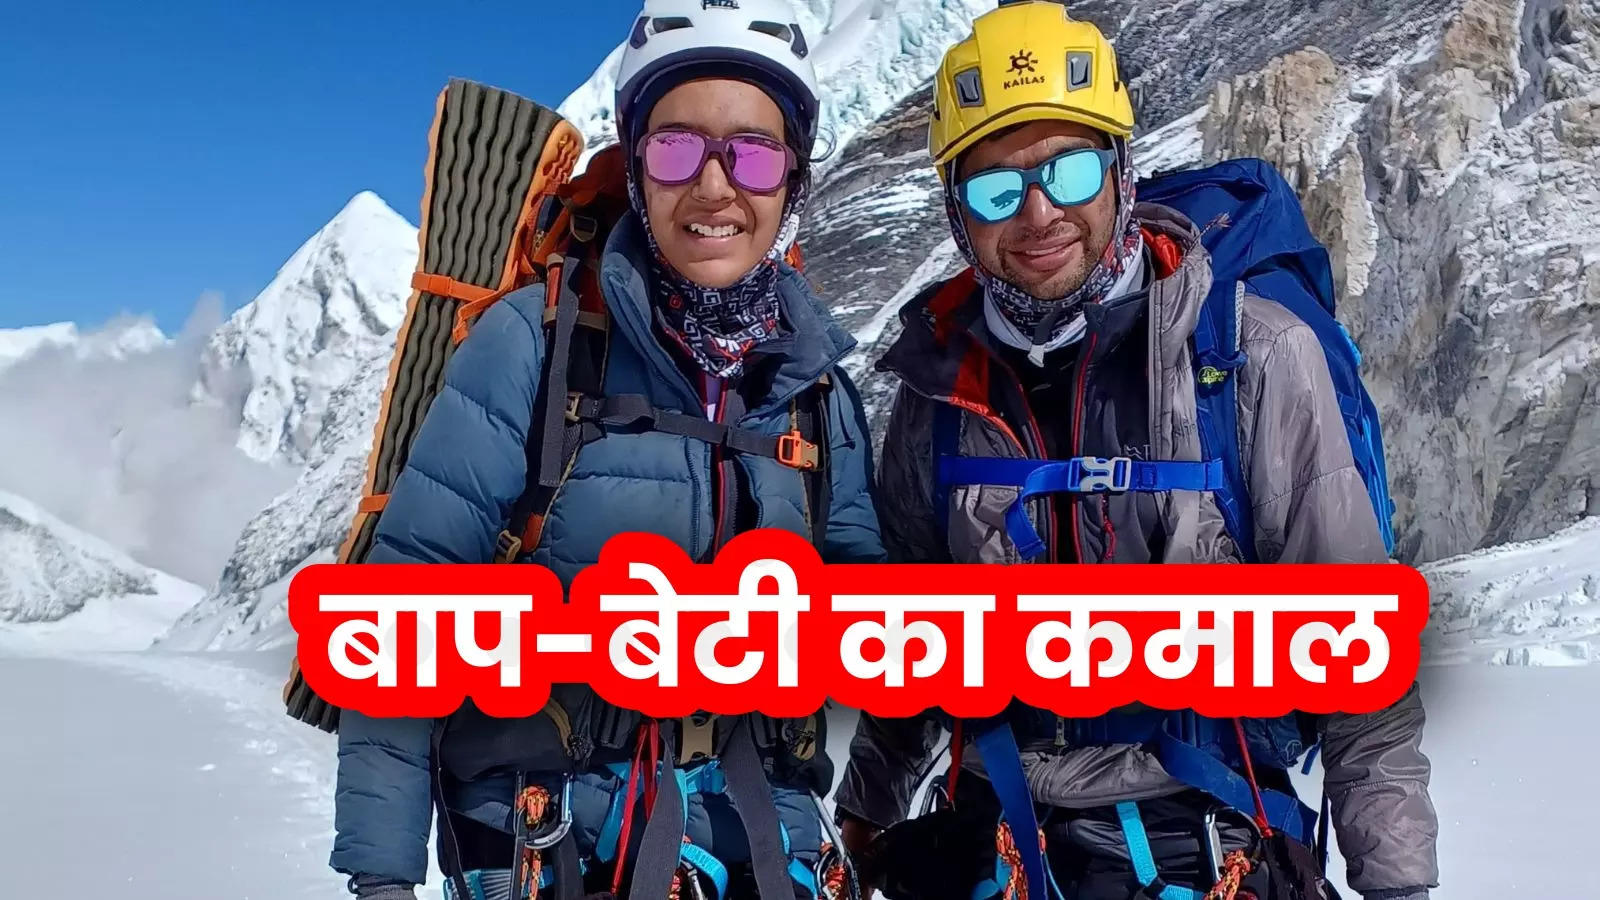 Strong determination at a young age, 16-year-old girl hoisted the tricolor flag on Mount Everest with her father, pictures will fill you with pride